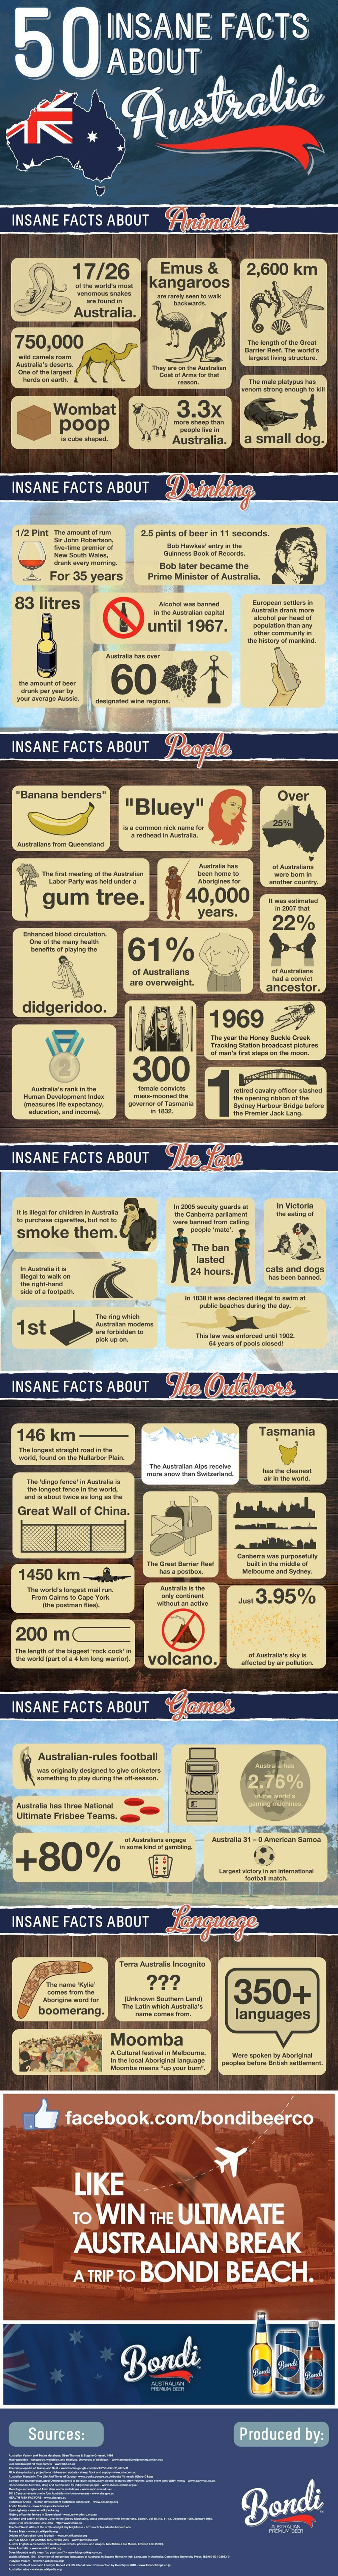 50 Insane Facts About Australia Infographic